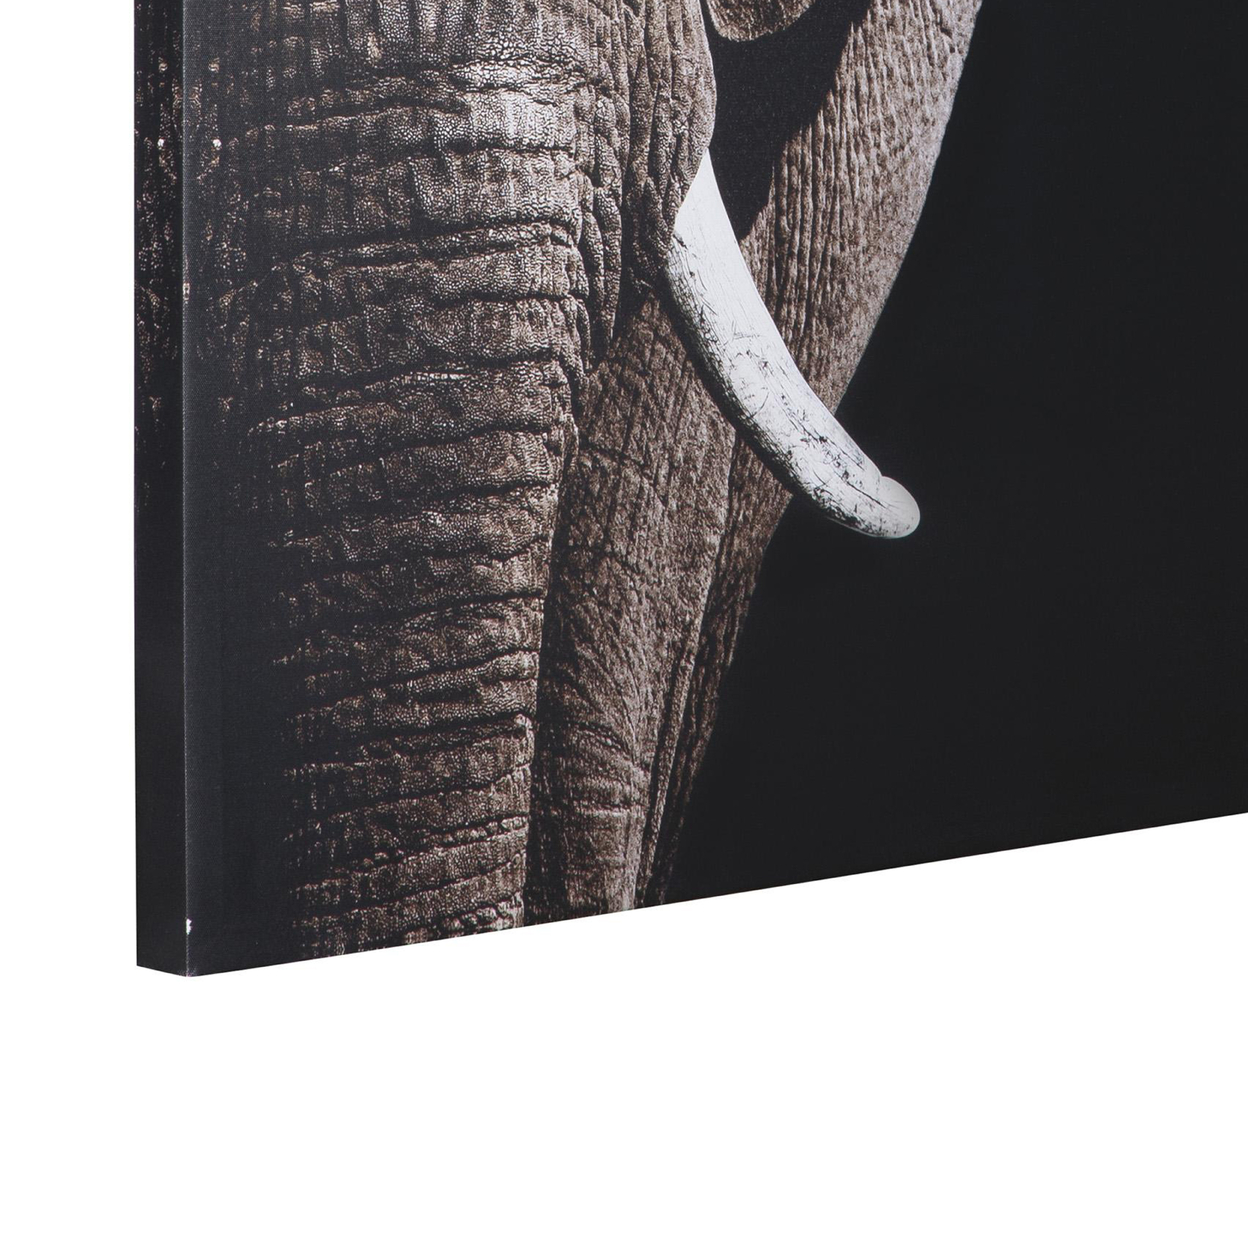 Gallery Wrapped Canvas Wall Art With Elephant Print, Gray And Black- Saltoro Sherpi